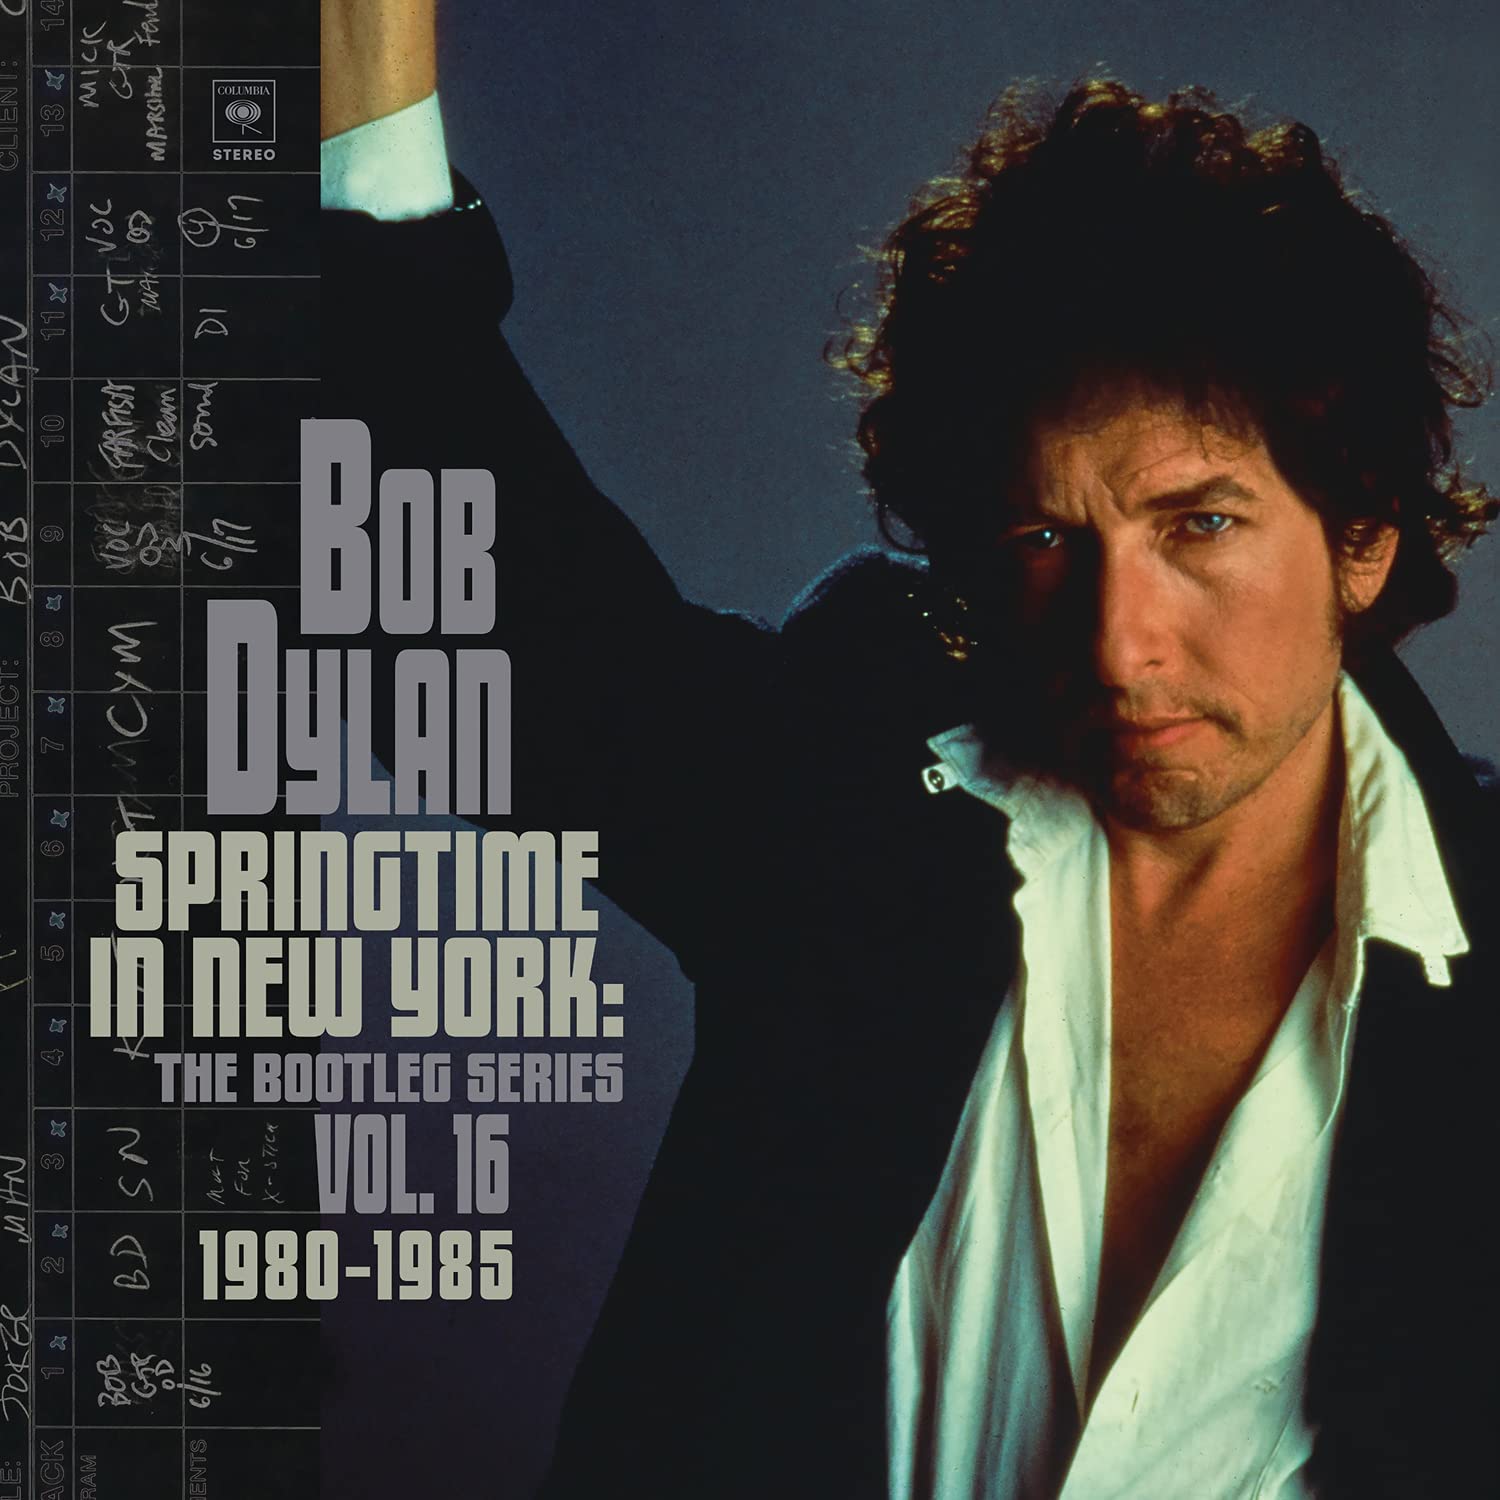 Springtime In New York: The Bootleg Series Vol. 16 (1980-1985) - Deluxe Edition 5CD | Bob Dylan